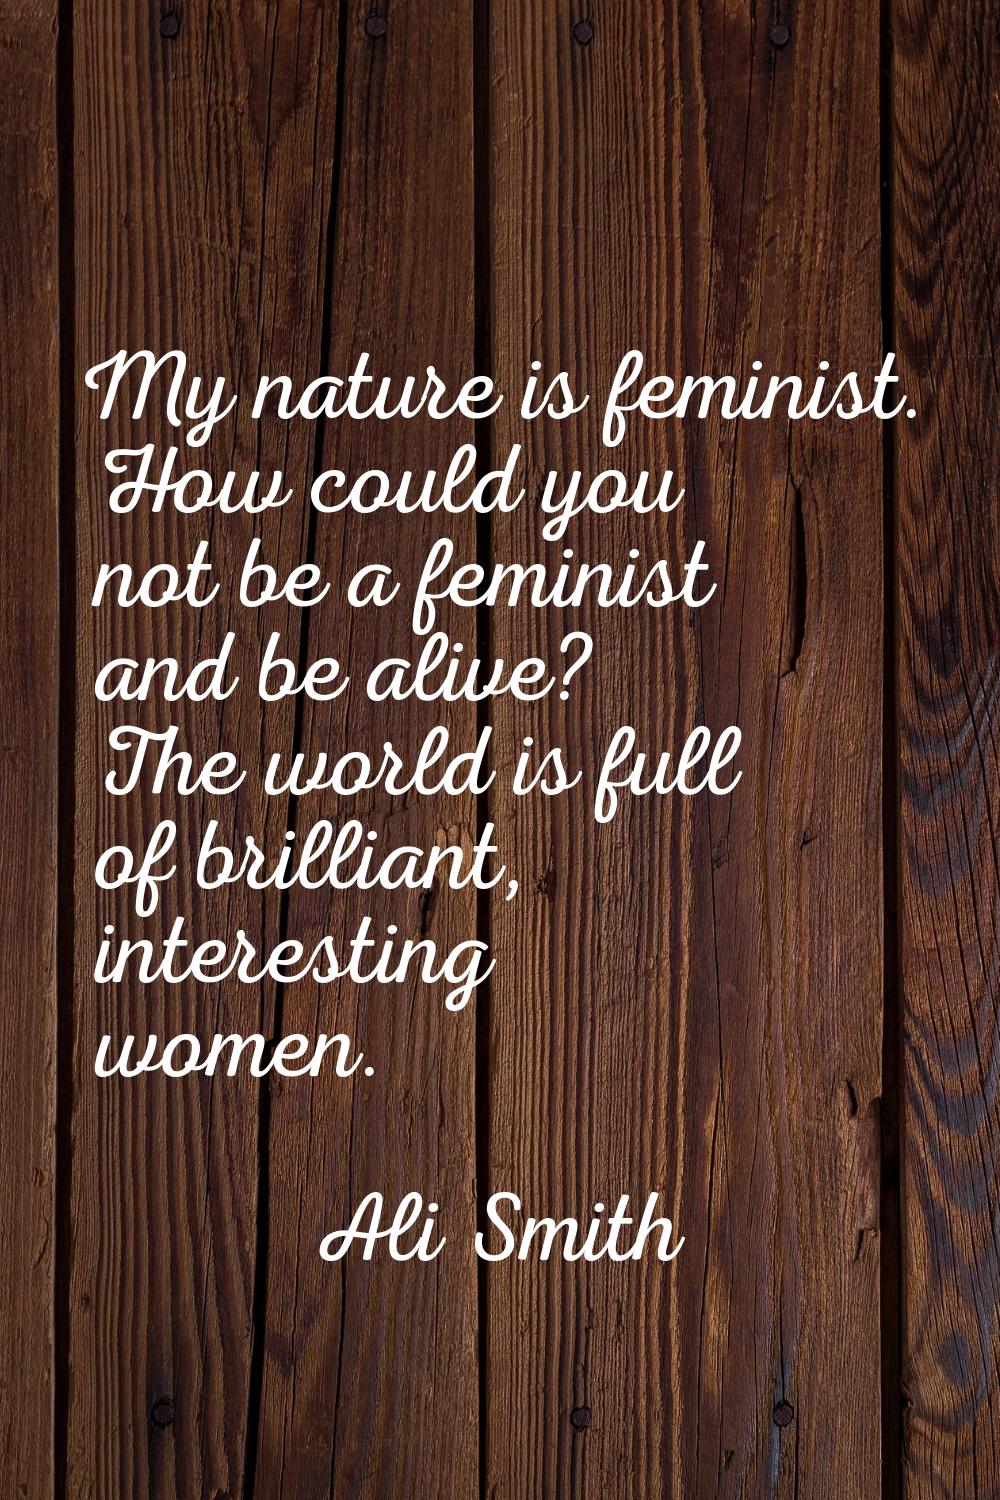 My nature is feminist. How could you not be a feminist and be alive? The world is full of brilliant